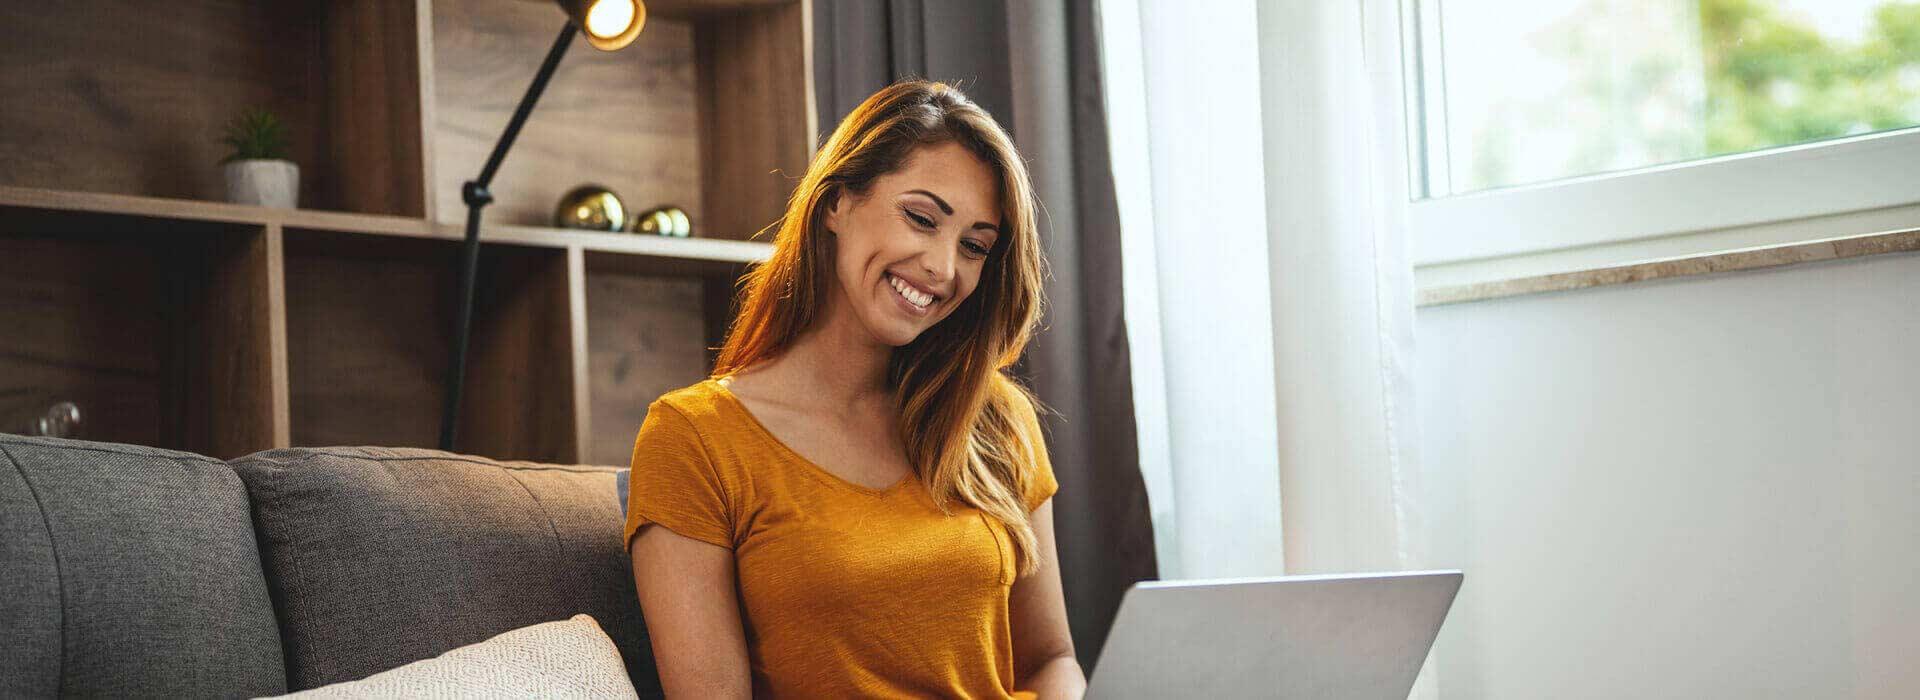 A woman smiling while using a laptop